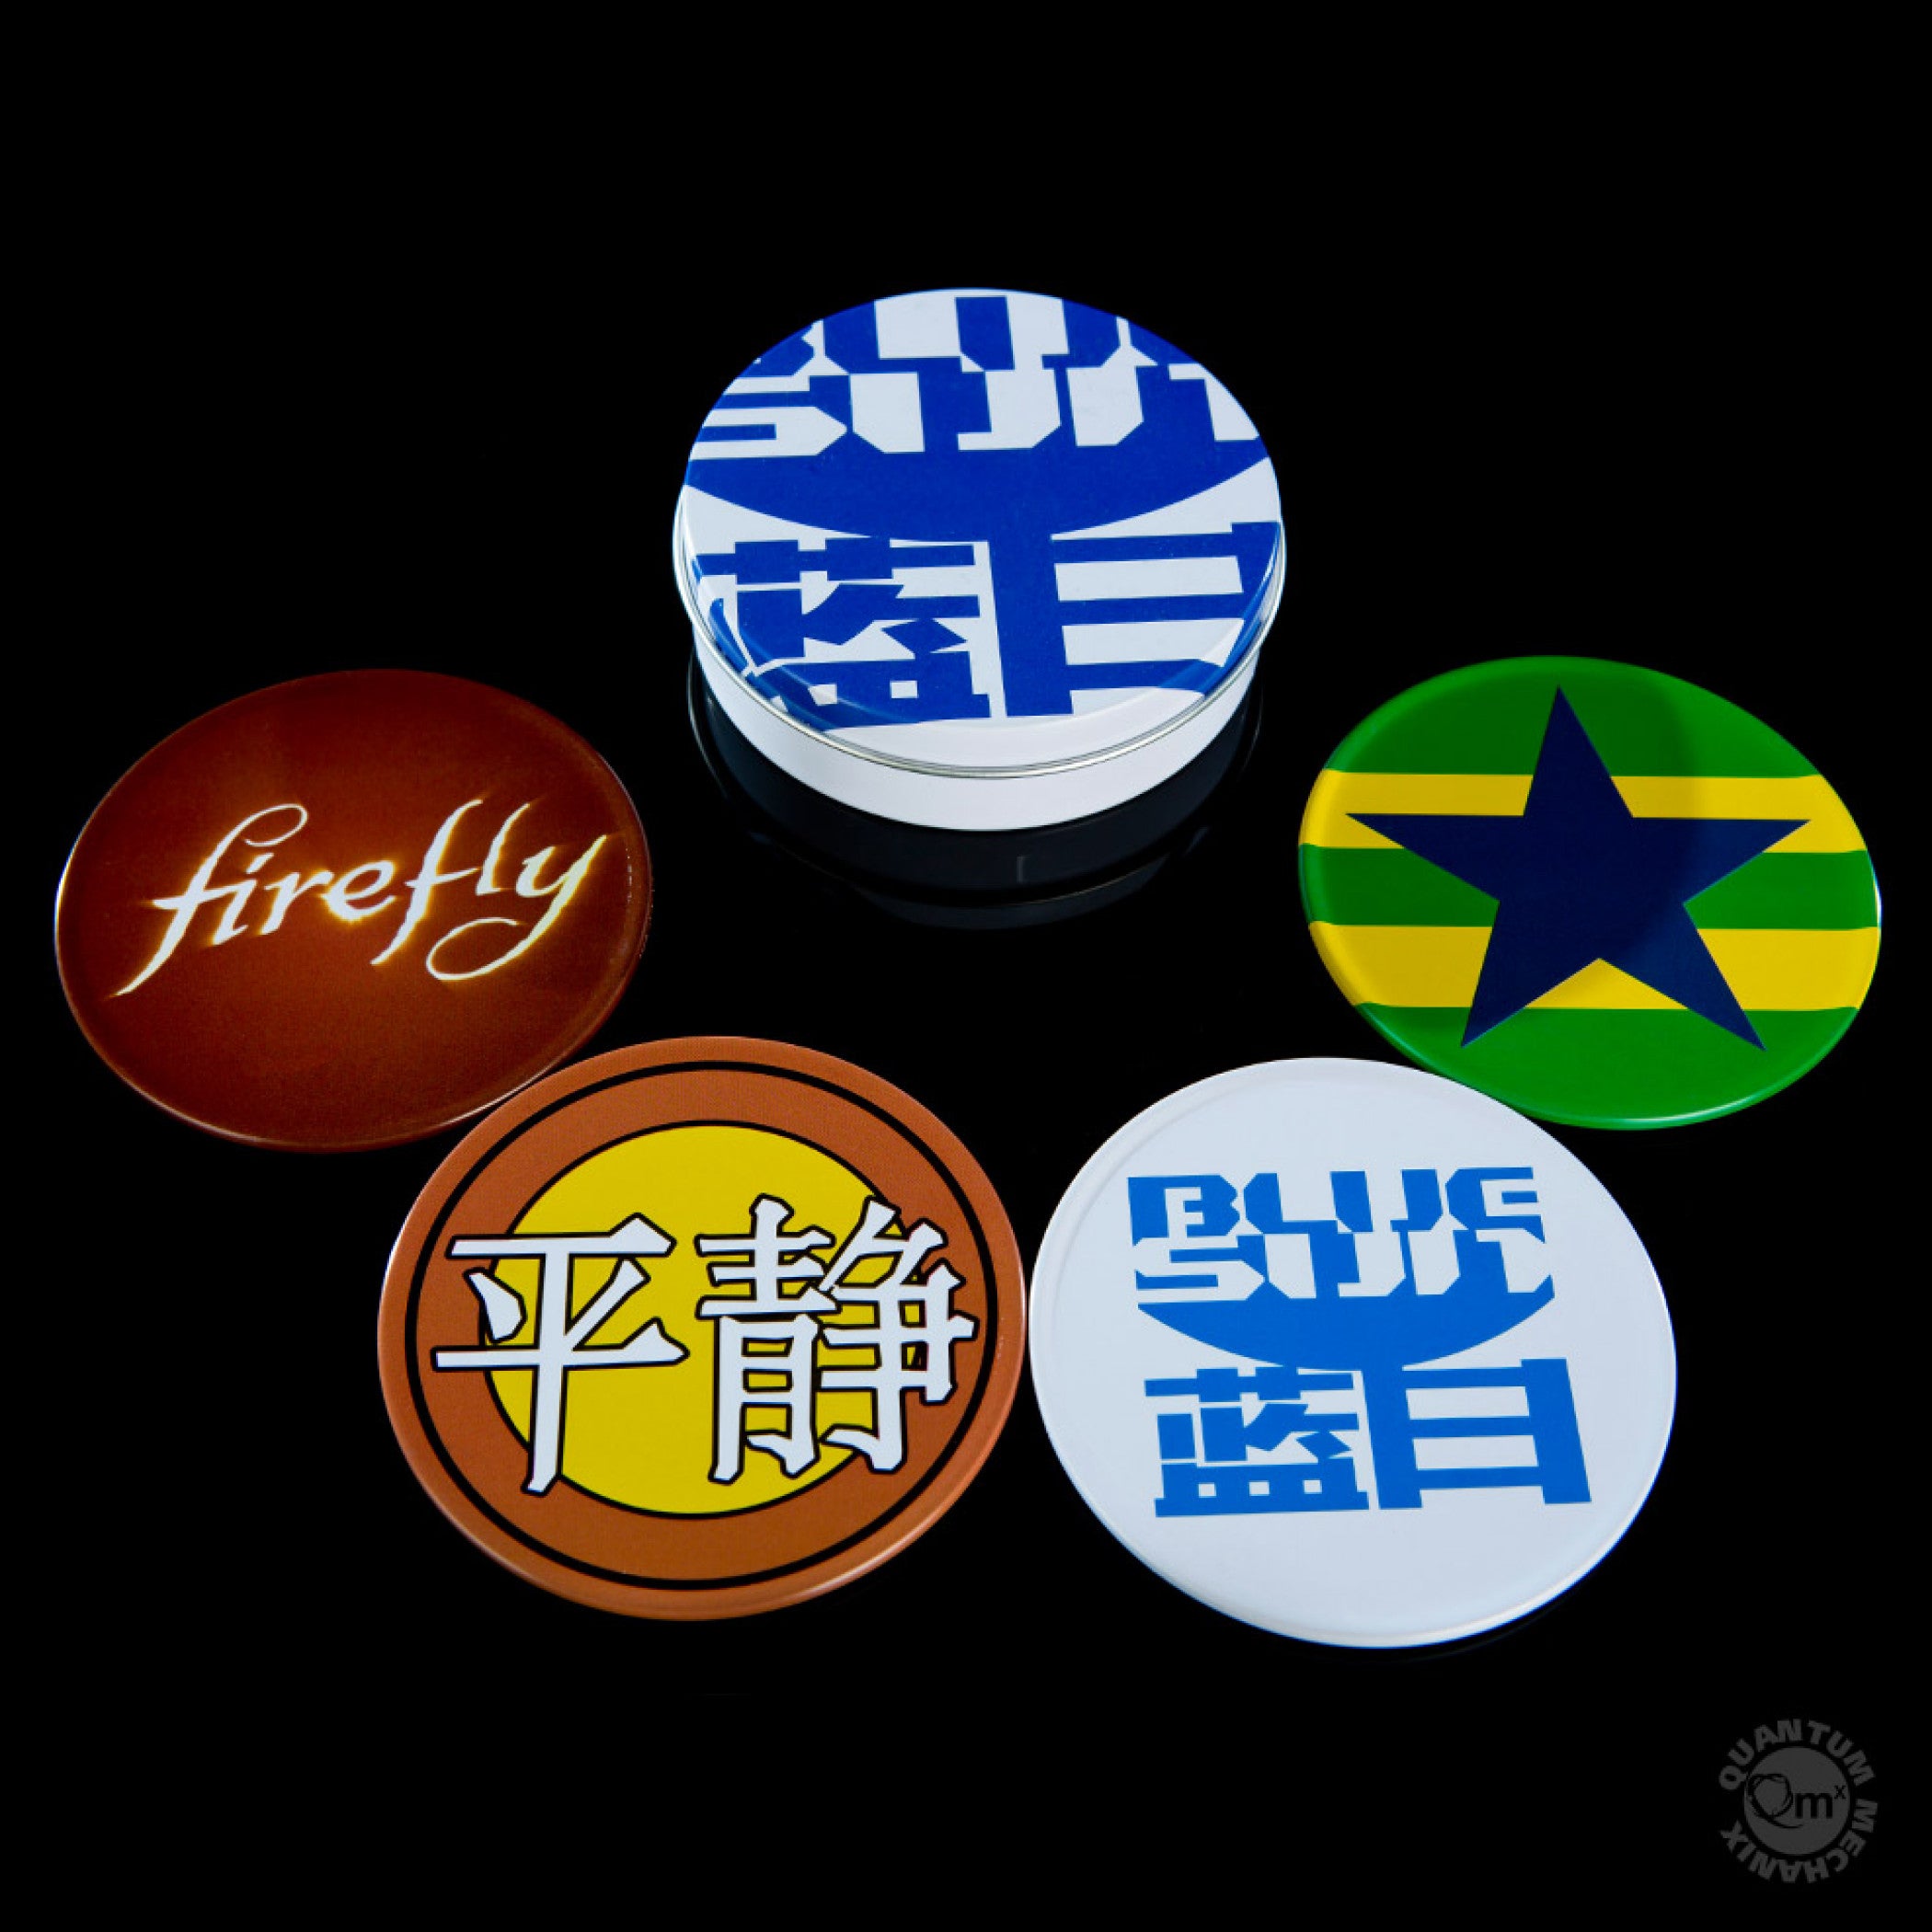 title:Firefly Variety 4-Pack Coaster Set;color:Multi-Color